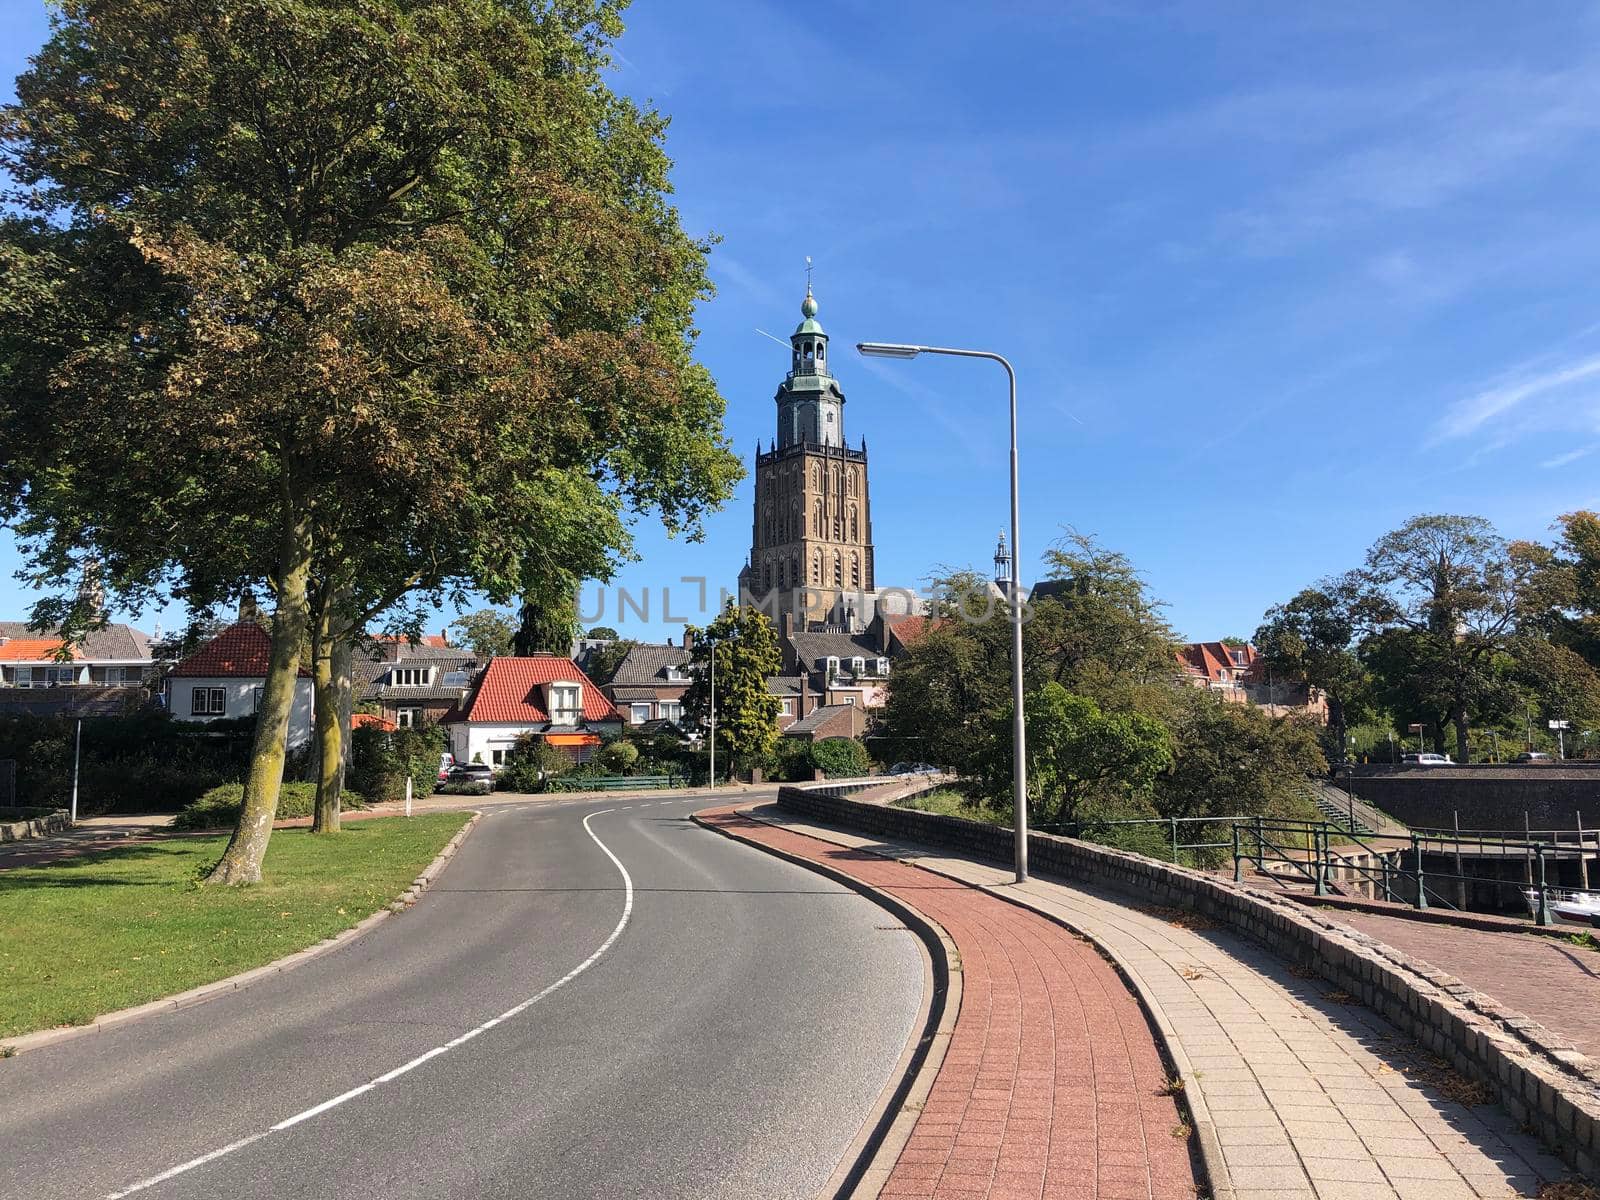 Road towards the old town with the St. Walburgis Church in Zutphen, Gelderland The Netherlands